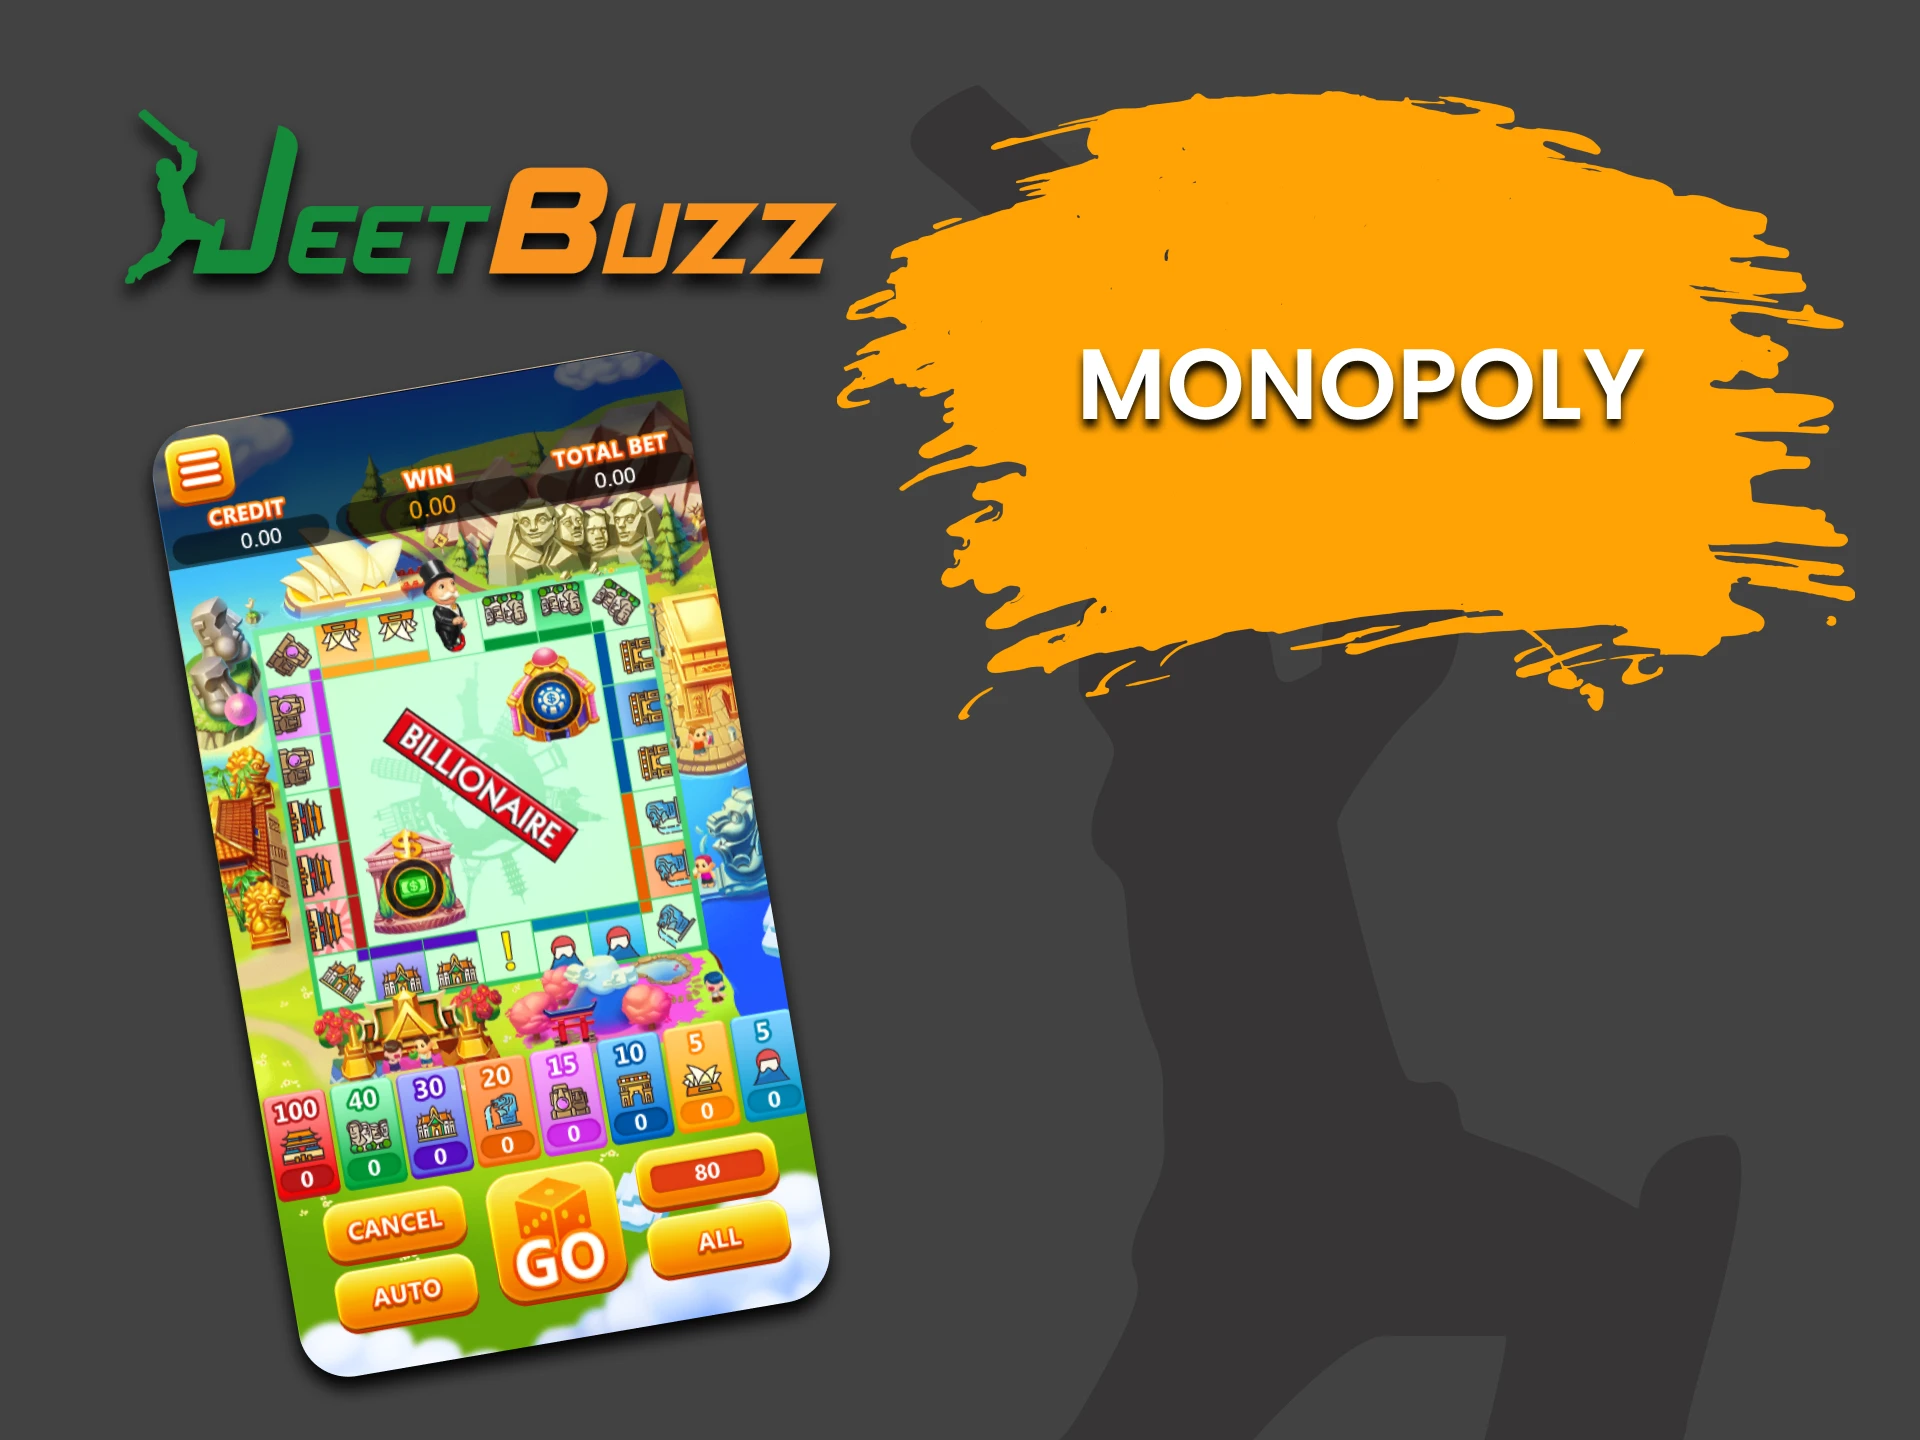 After selecting the Arcade section of JeetBuzz, try playing Monopoly.